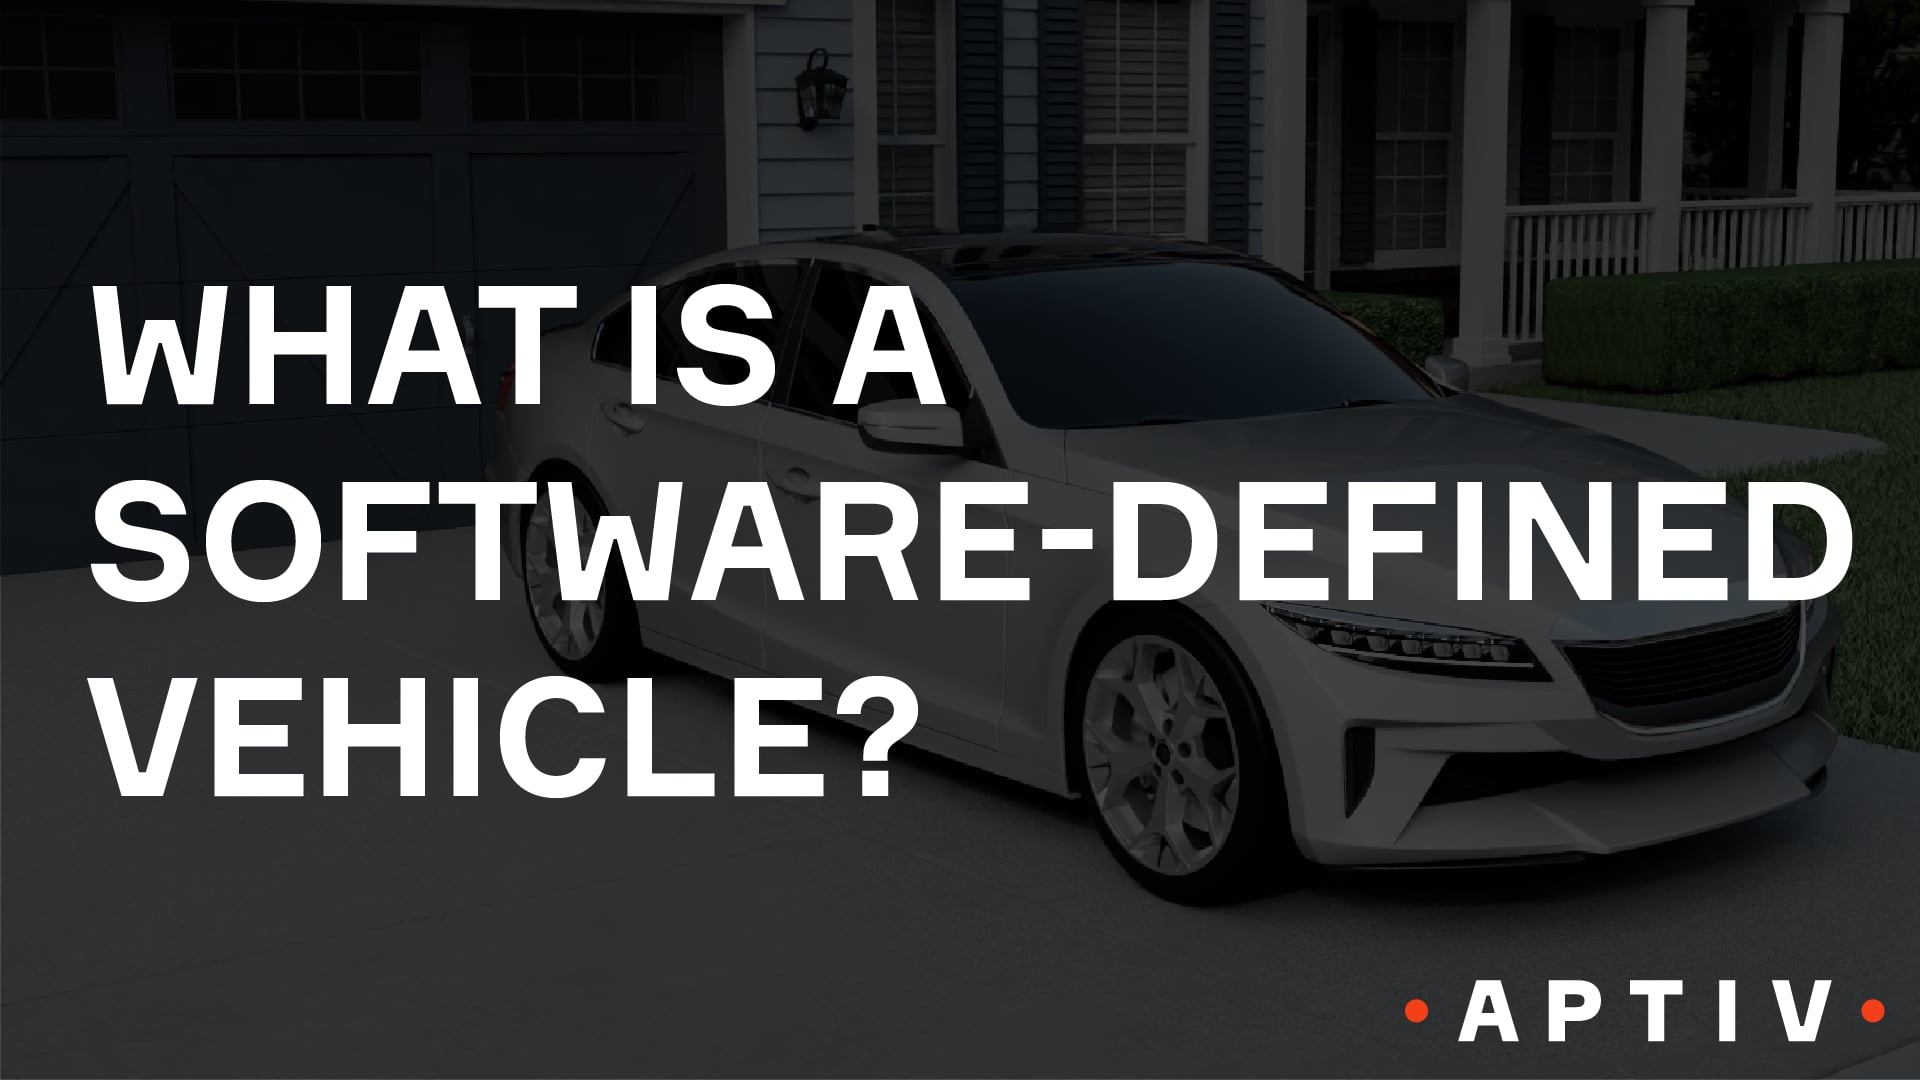 What Is a Software-Defined Vehicle?